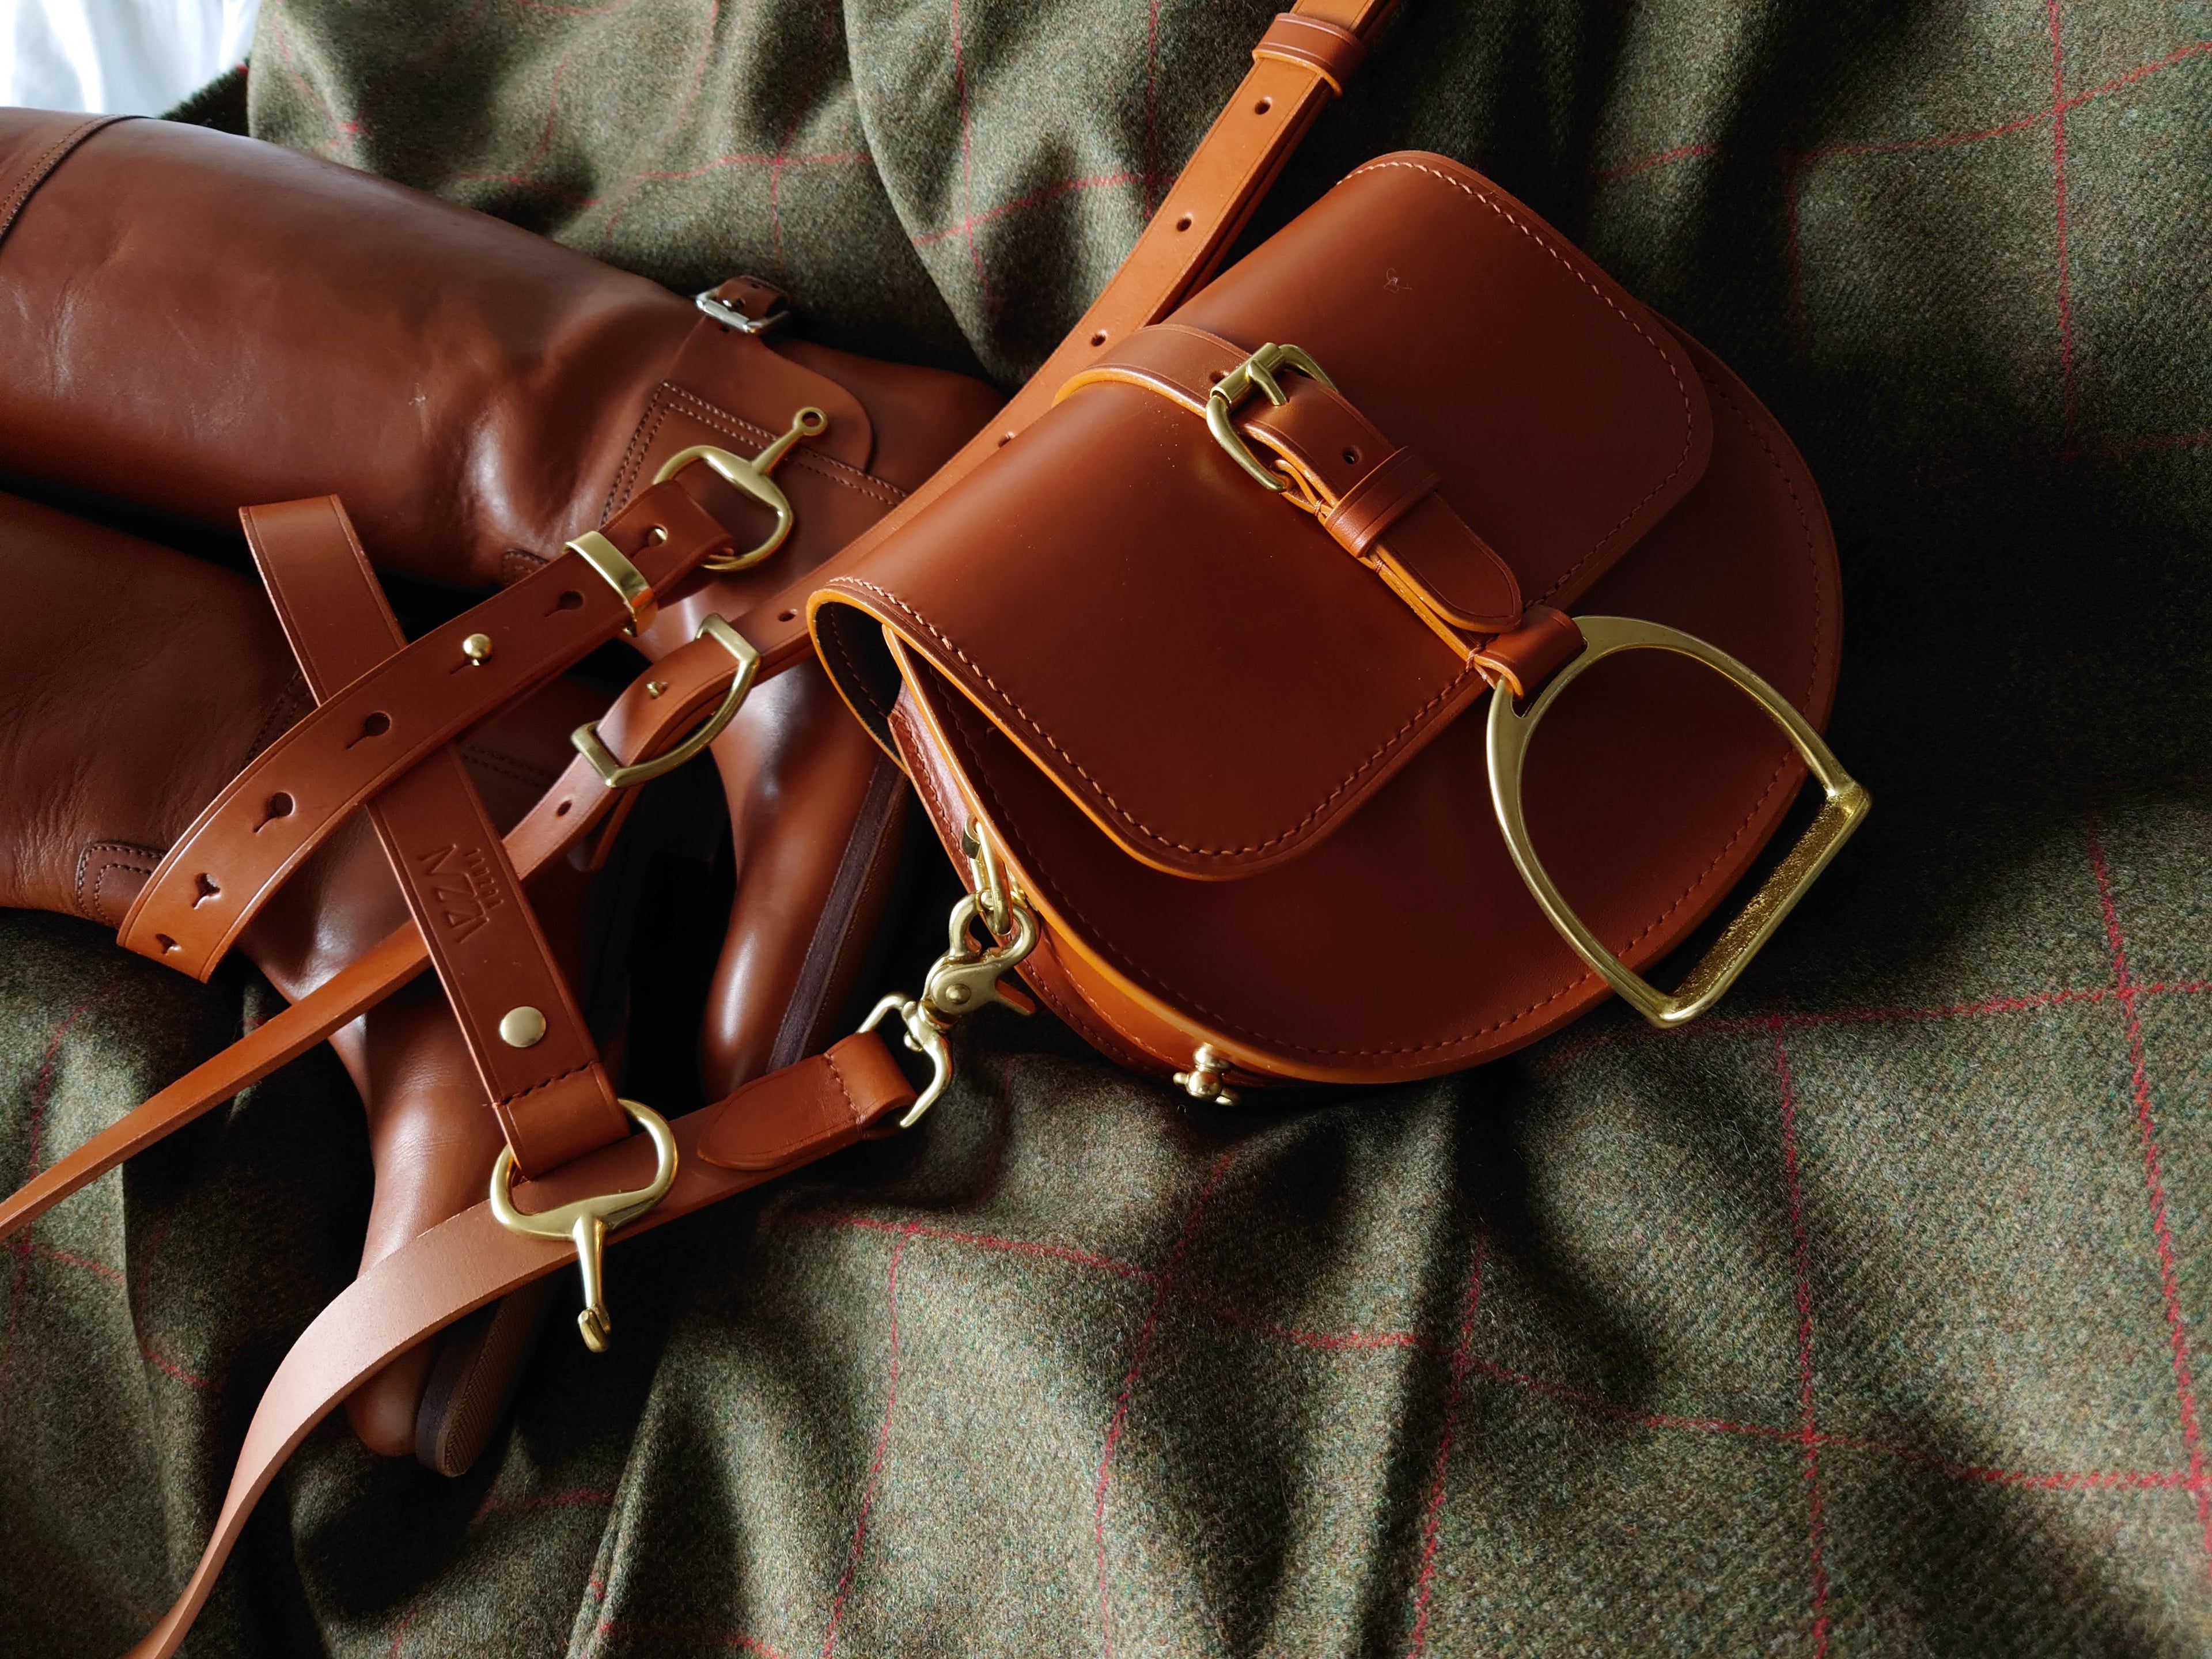 handcrafted leather bag and belt